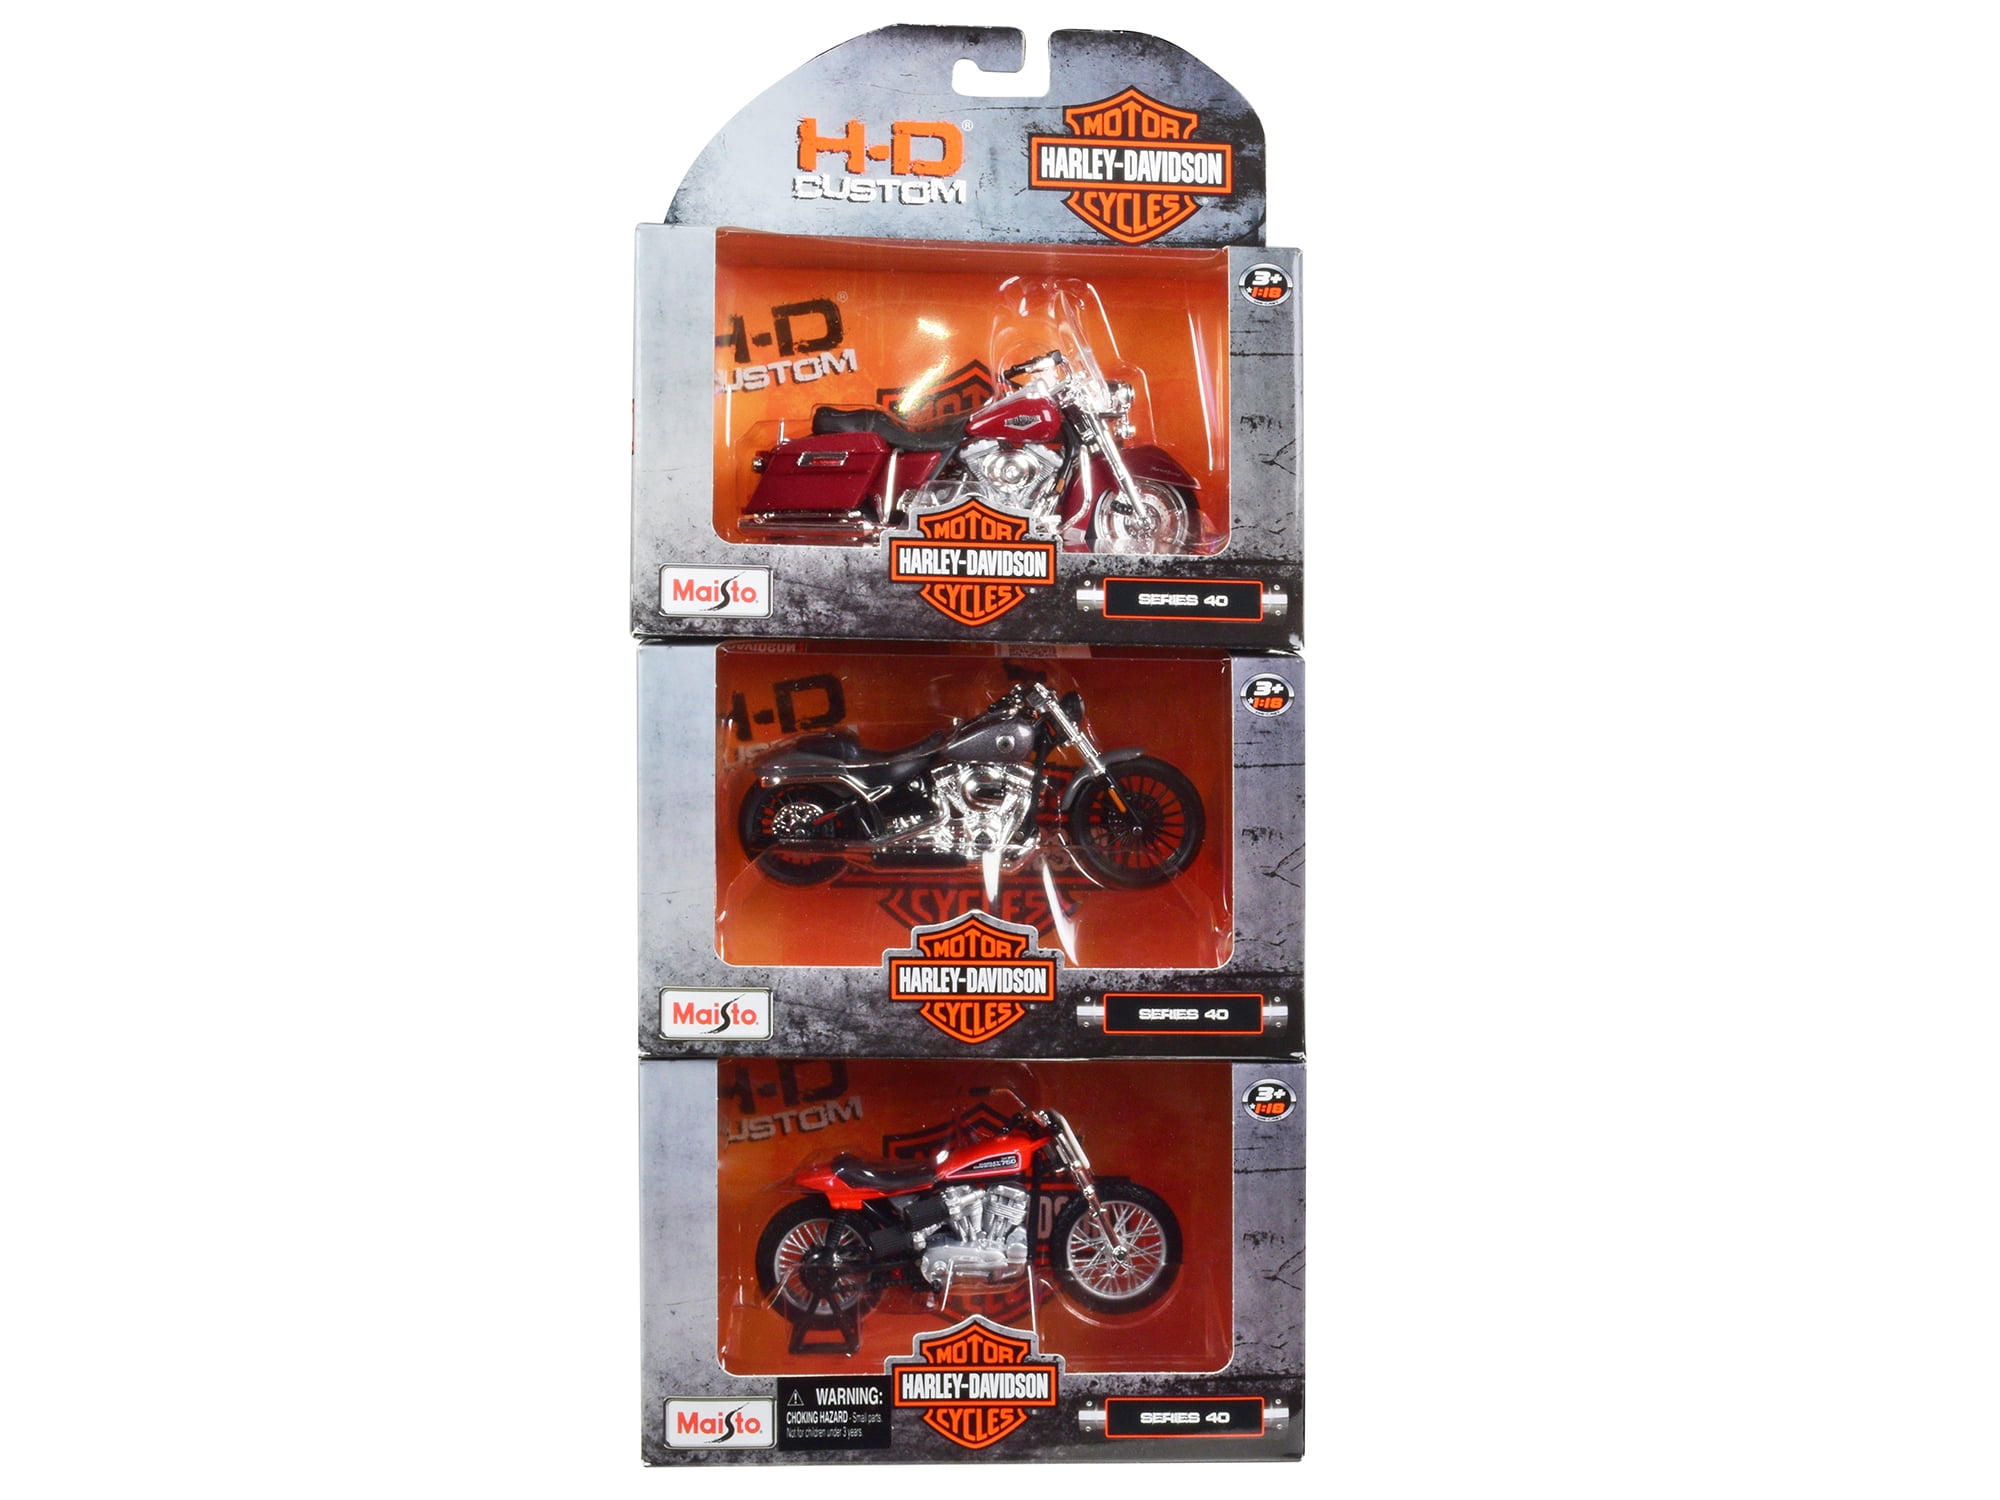 Harley Davidson Miniature Motorcycles lot of 6 - Miniature Dollhouse 1:18  scale